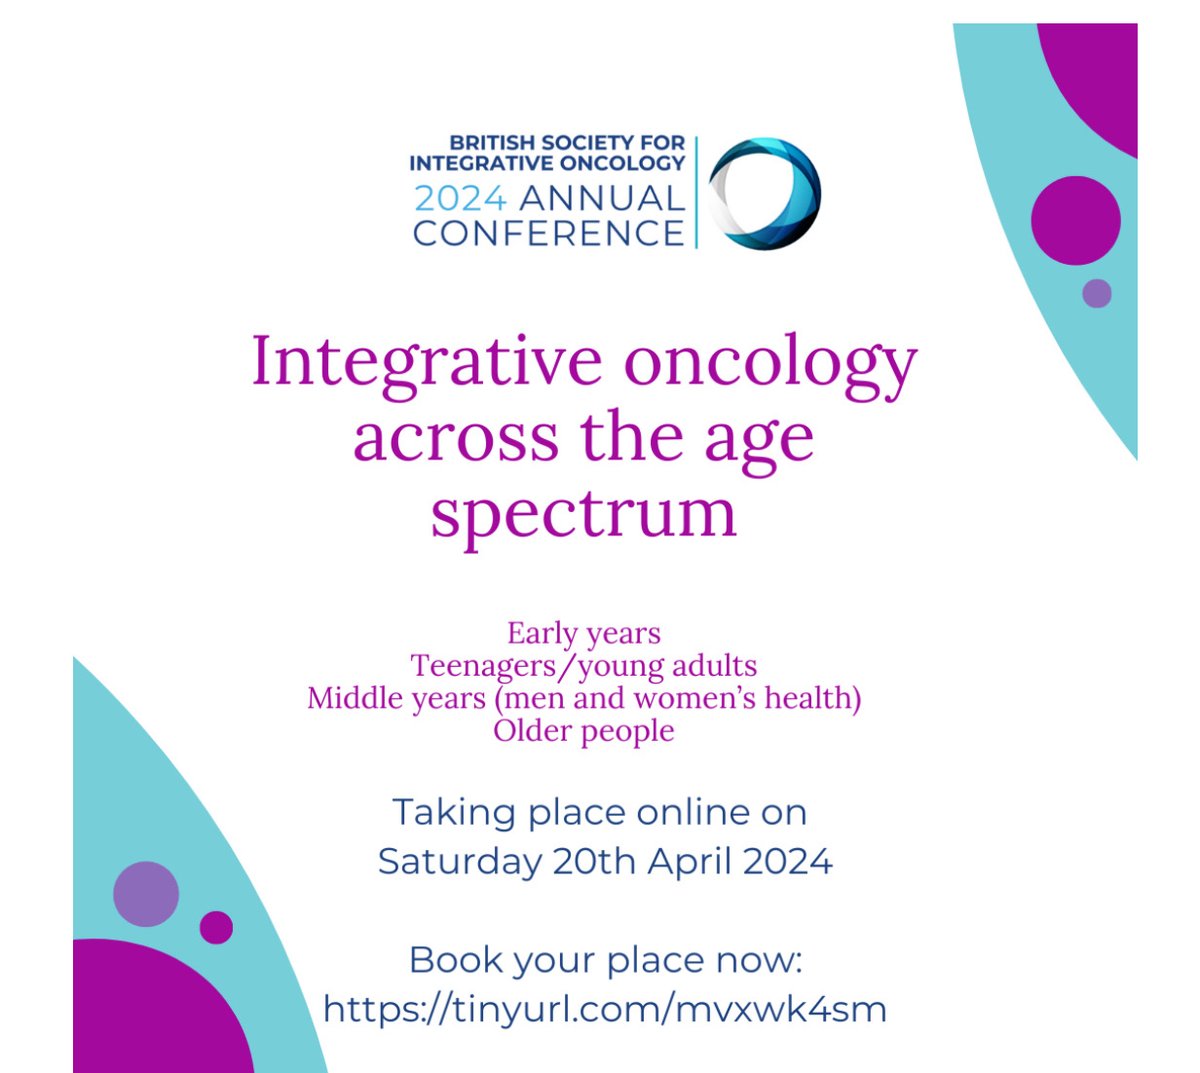 The British Society for Integrative Oncology (BSIO) Annual Conference 2024 takes place online on Saturday 20th April: zurl.co/X57C SIO members have been sent a 10% discount code. Not an SIO member? Join today at zurl.co/H8bO #integrativeoncology